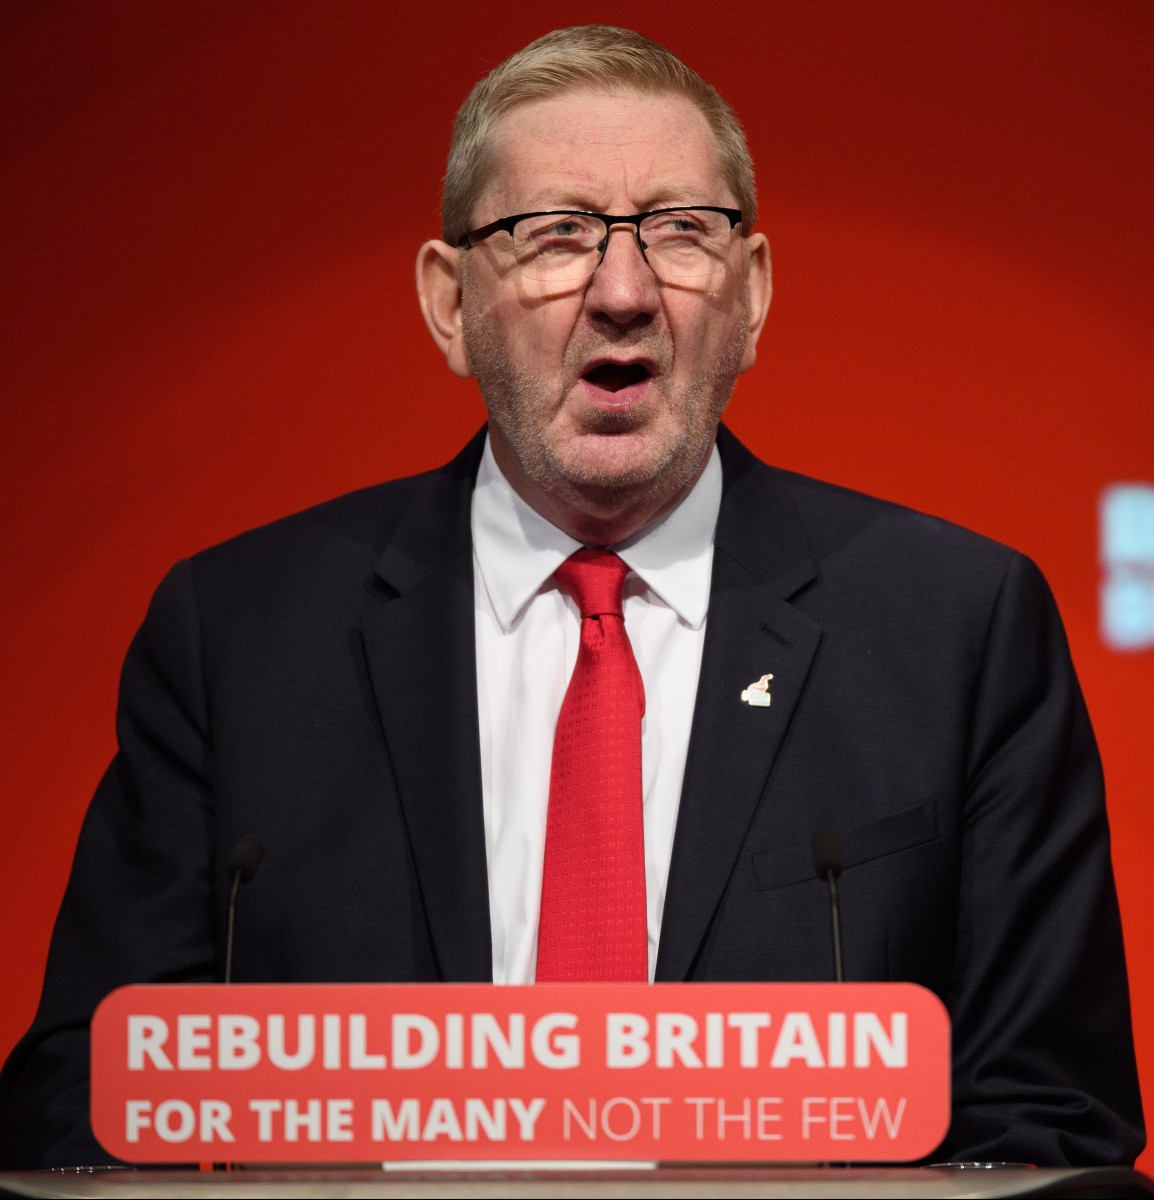 Unite boss Len McCluskey called a vote by left-wing activists to widen free movement rules wrong